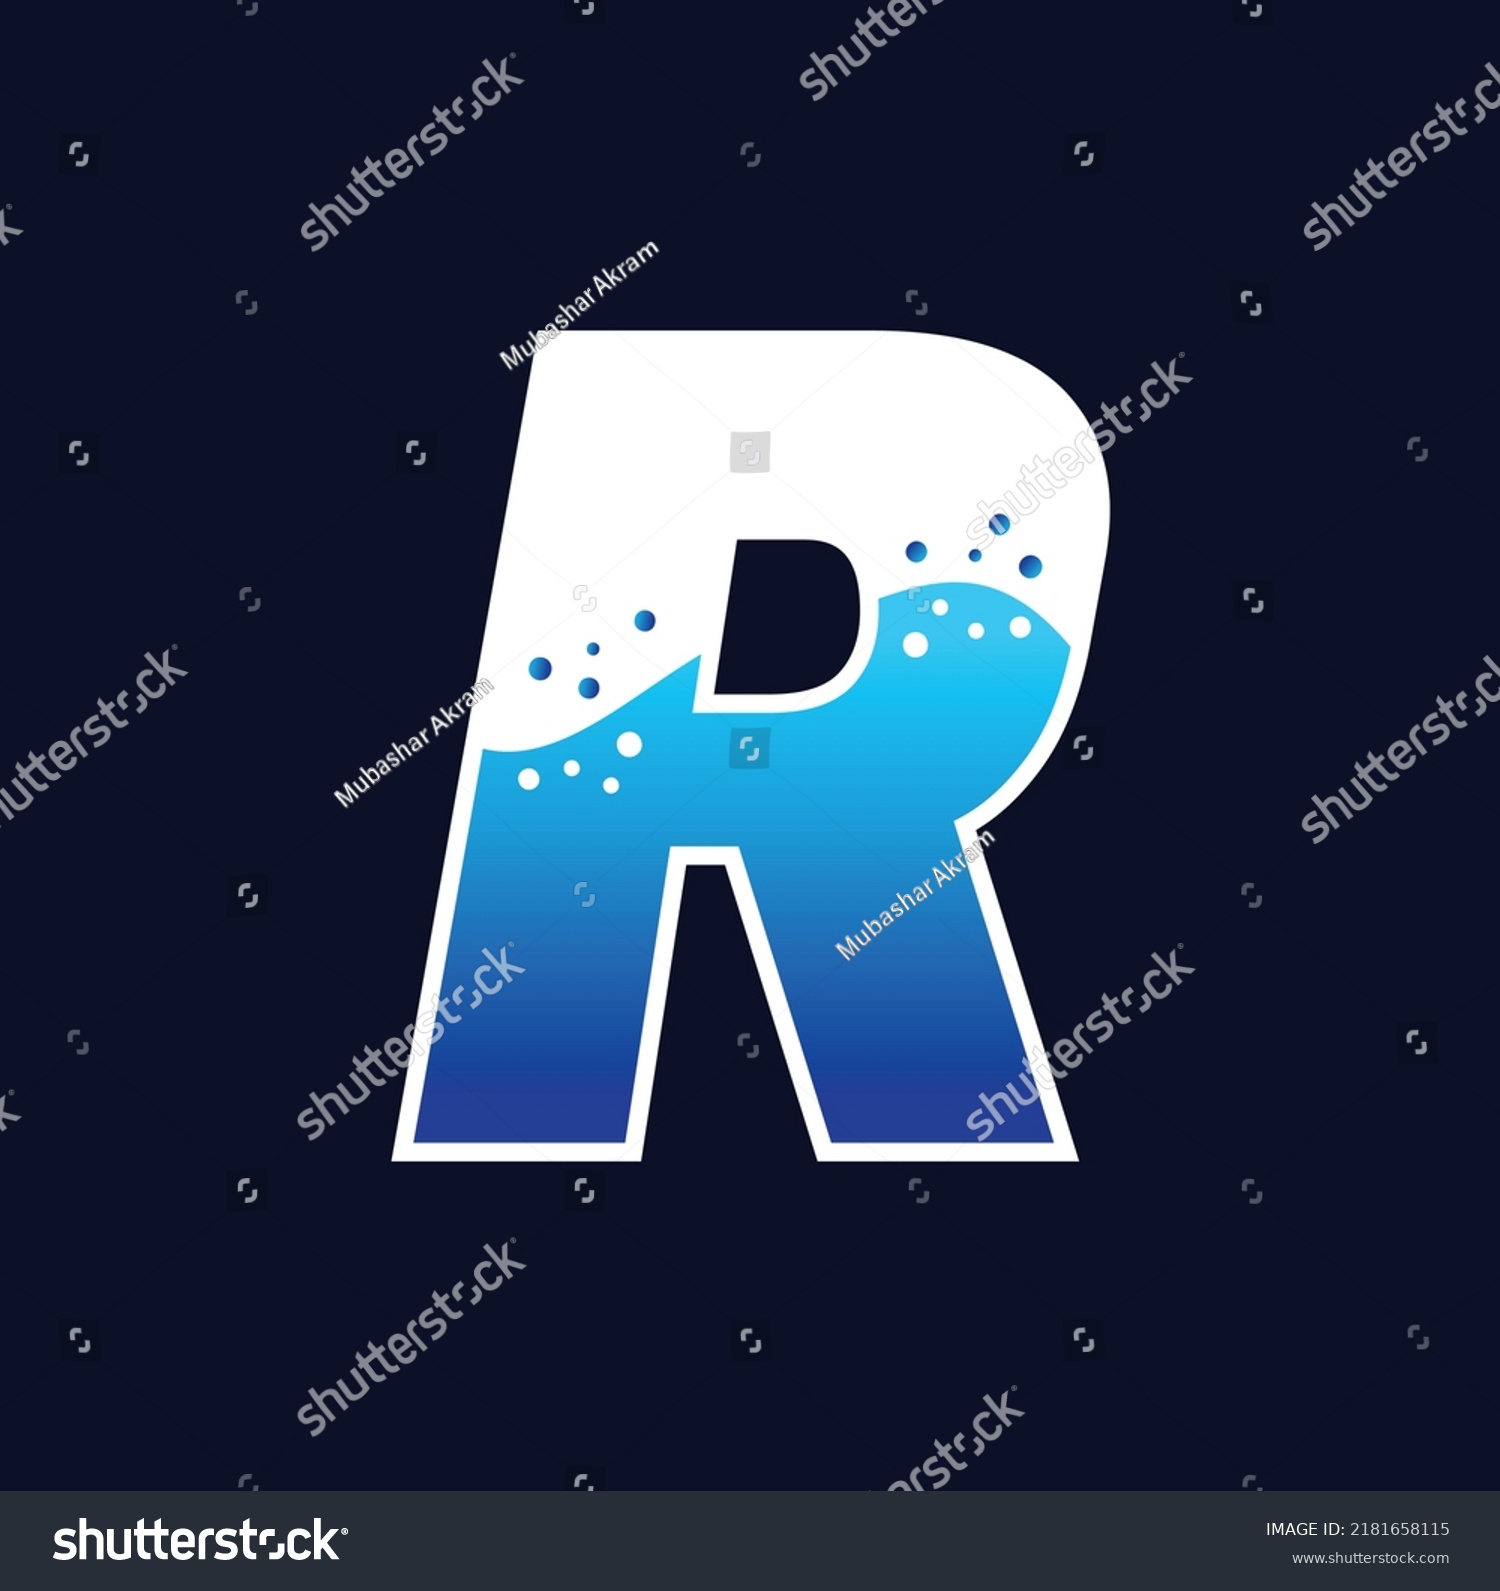 71 R laundry Images, Stock Photos & Vectors | Shutterstock